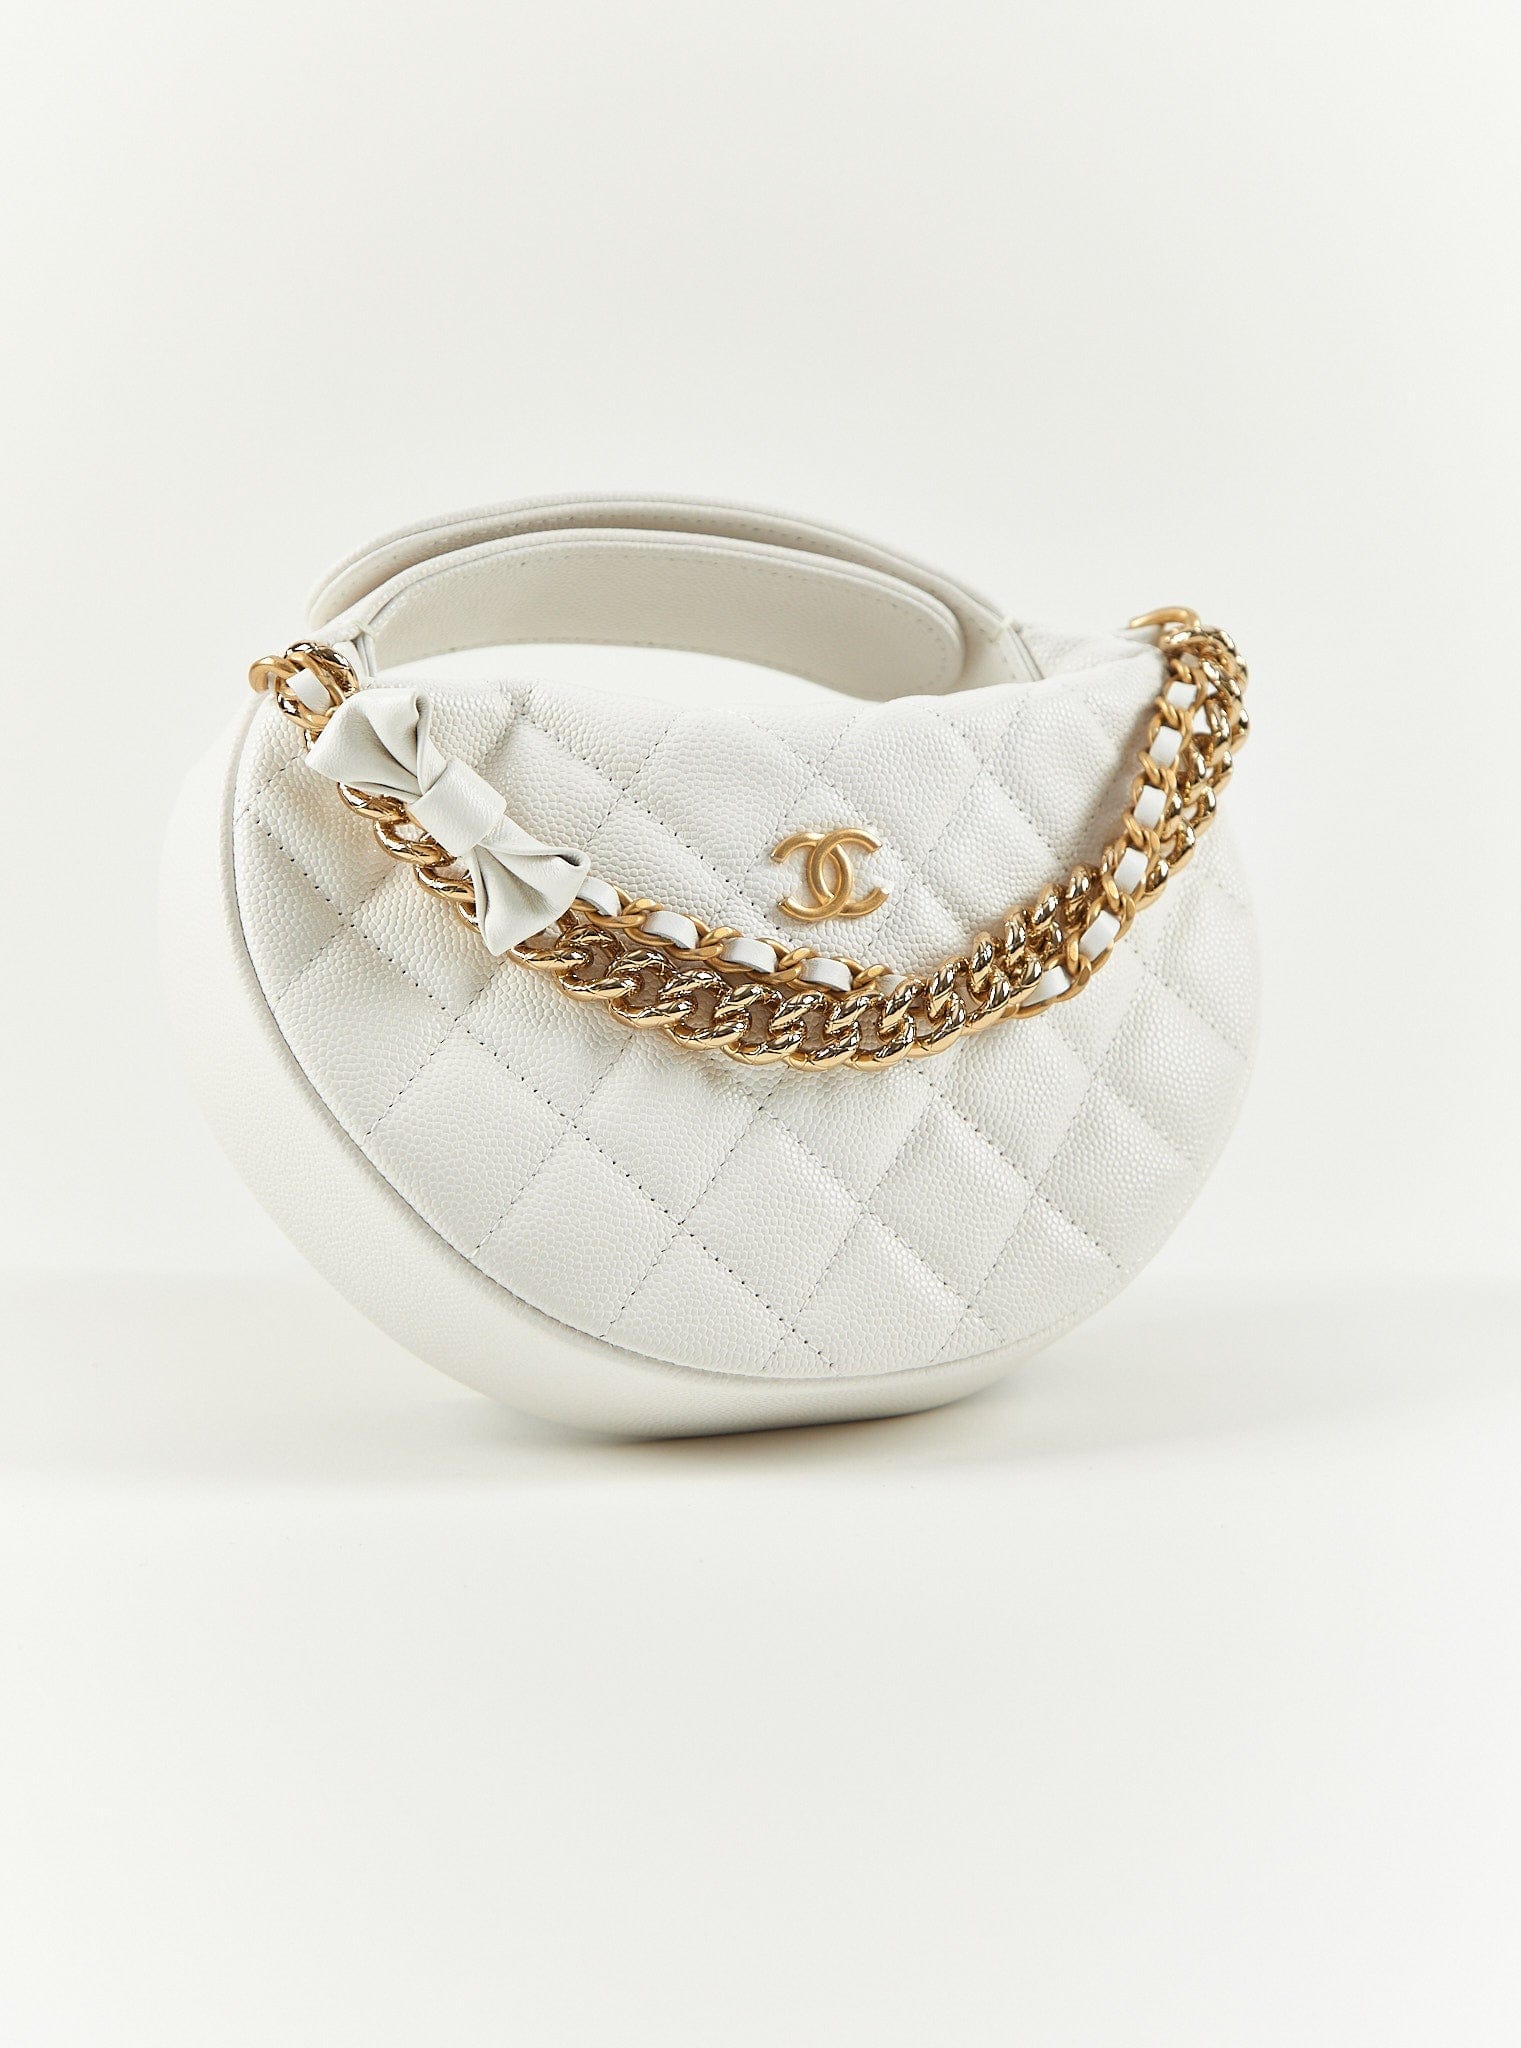 Chanel CHANEL MINI LOOP CHANGE PURSE WITH CHAINS WHITE Caviar Leather with Gold-Tone Hardware